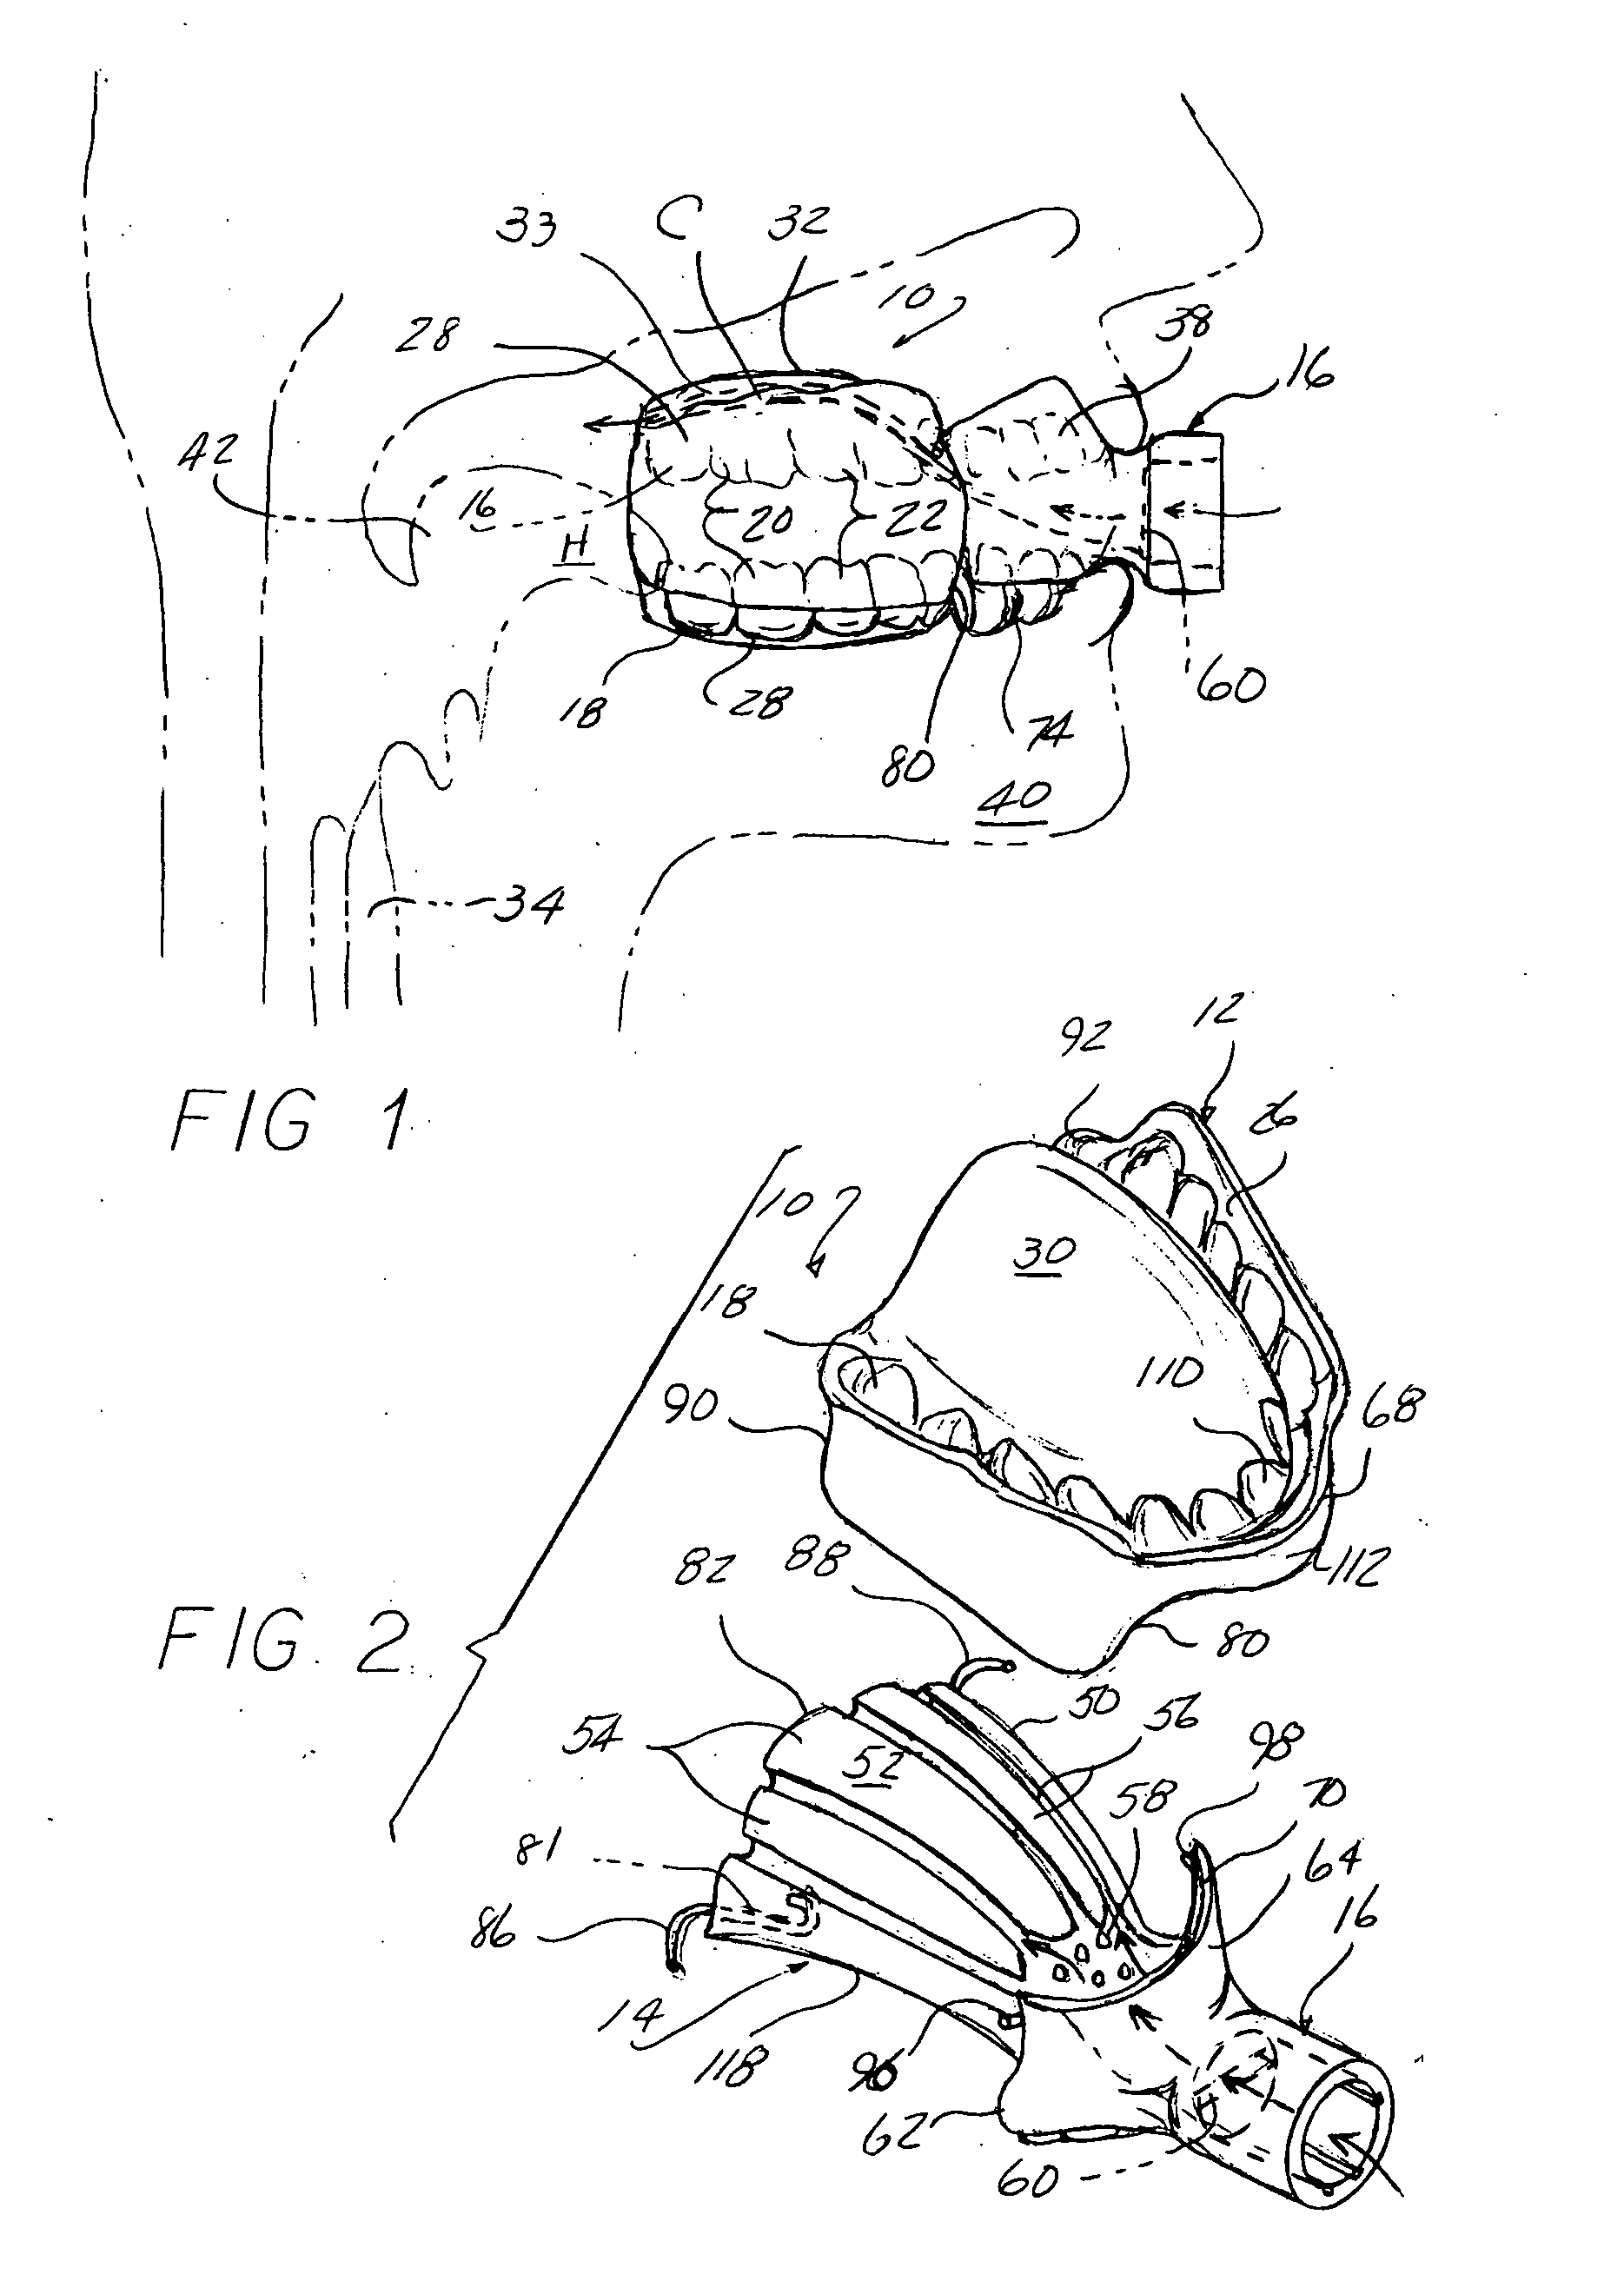 Method and device for addressing sleep apnea and related breathing disorders